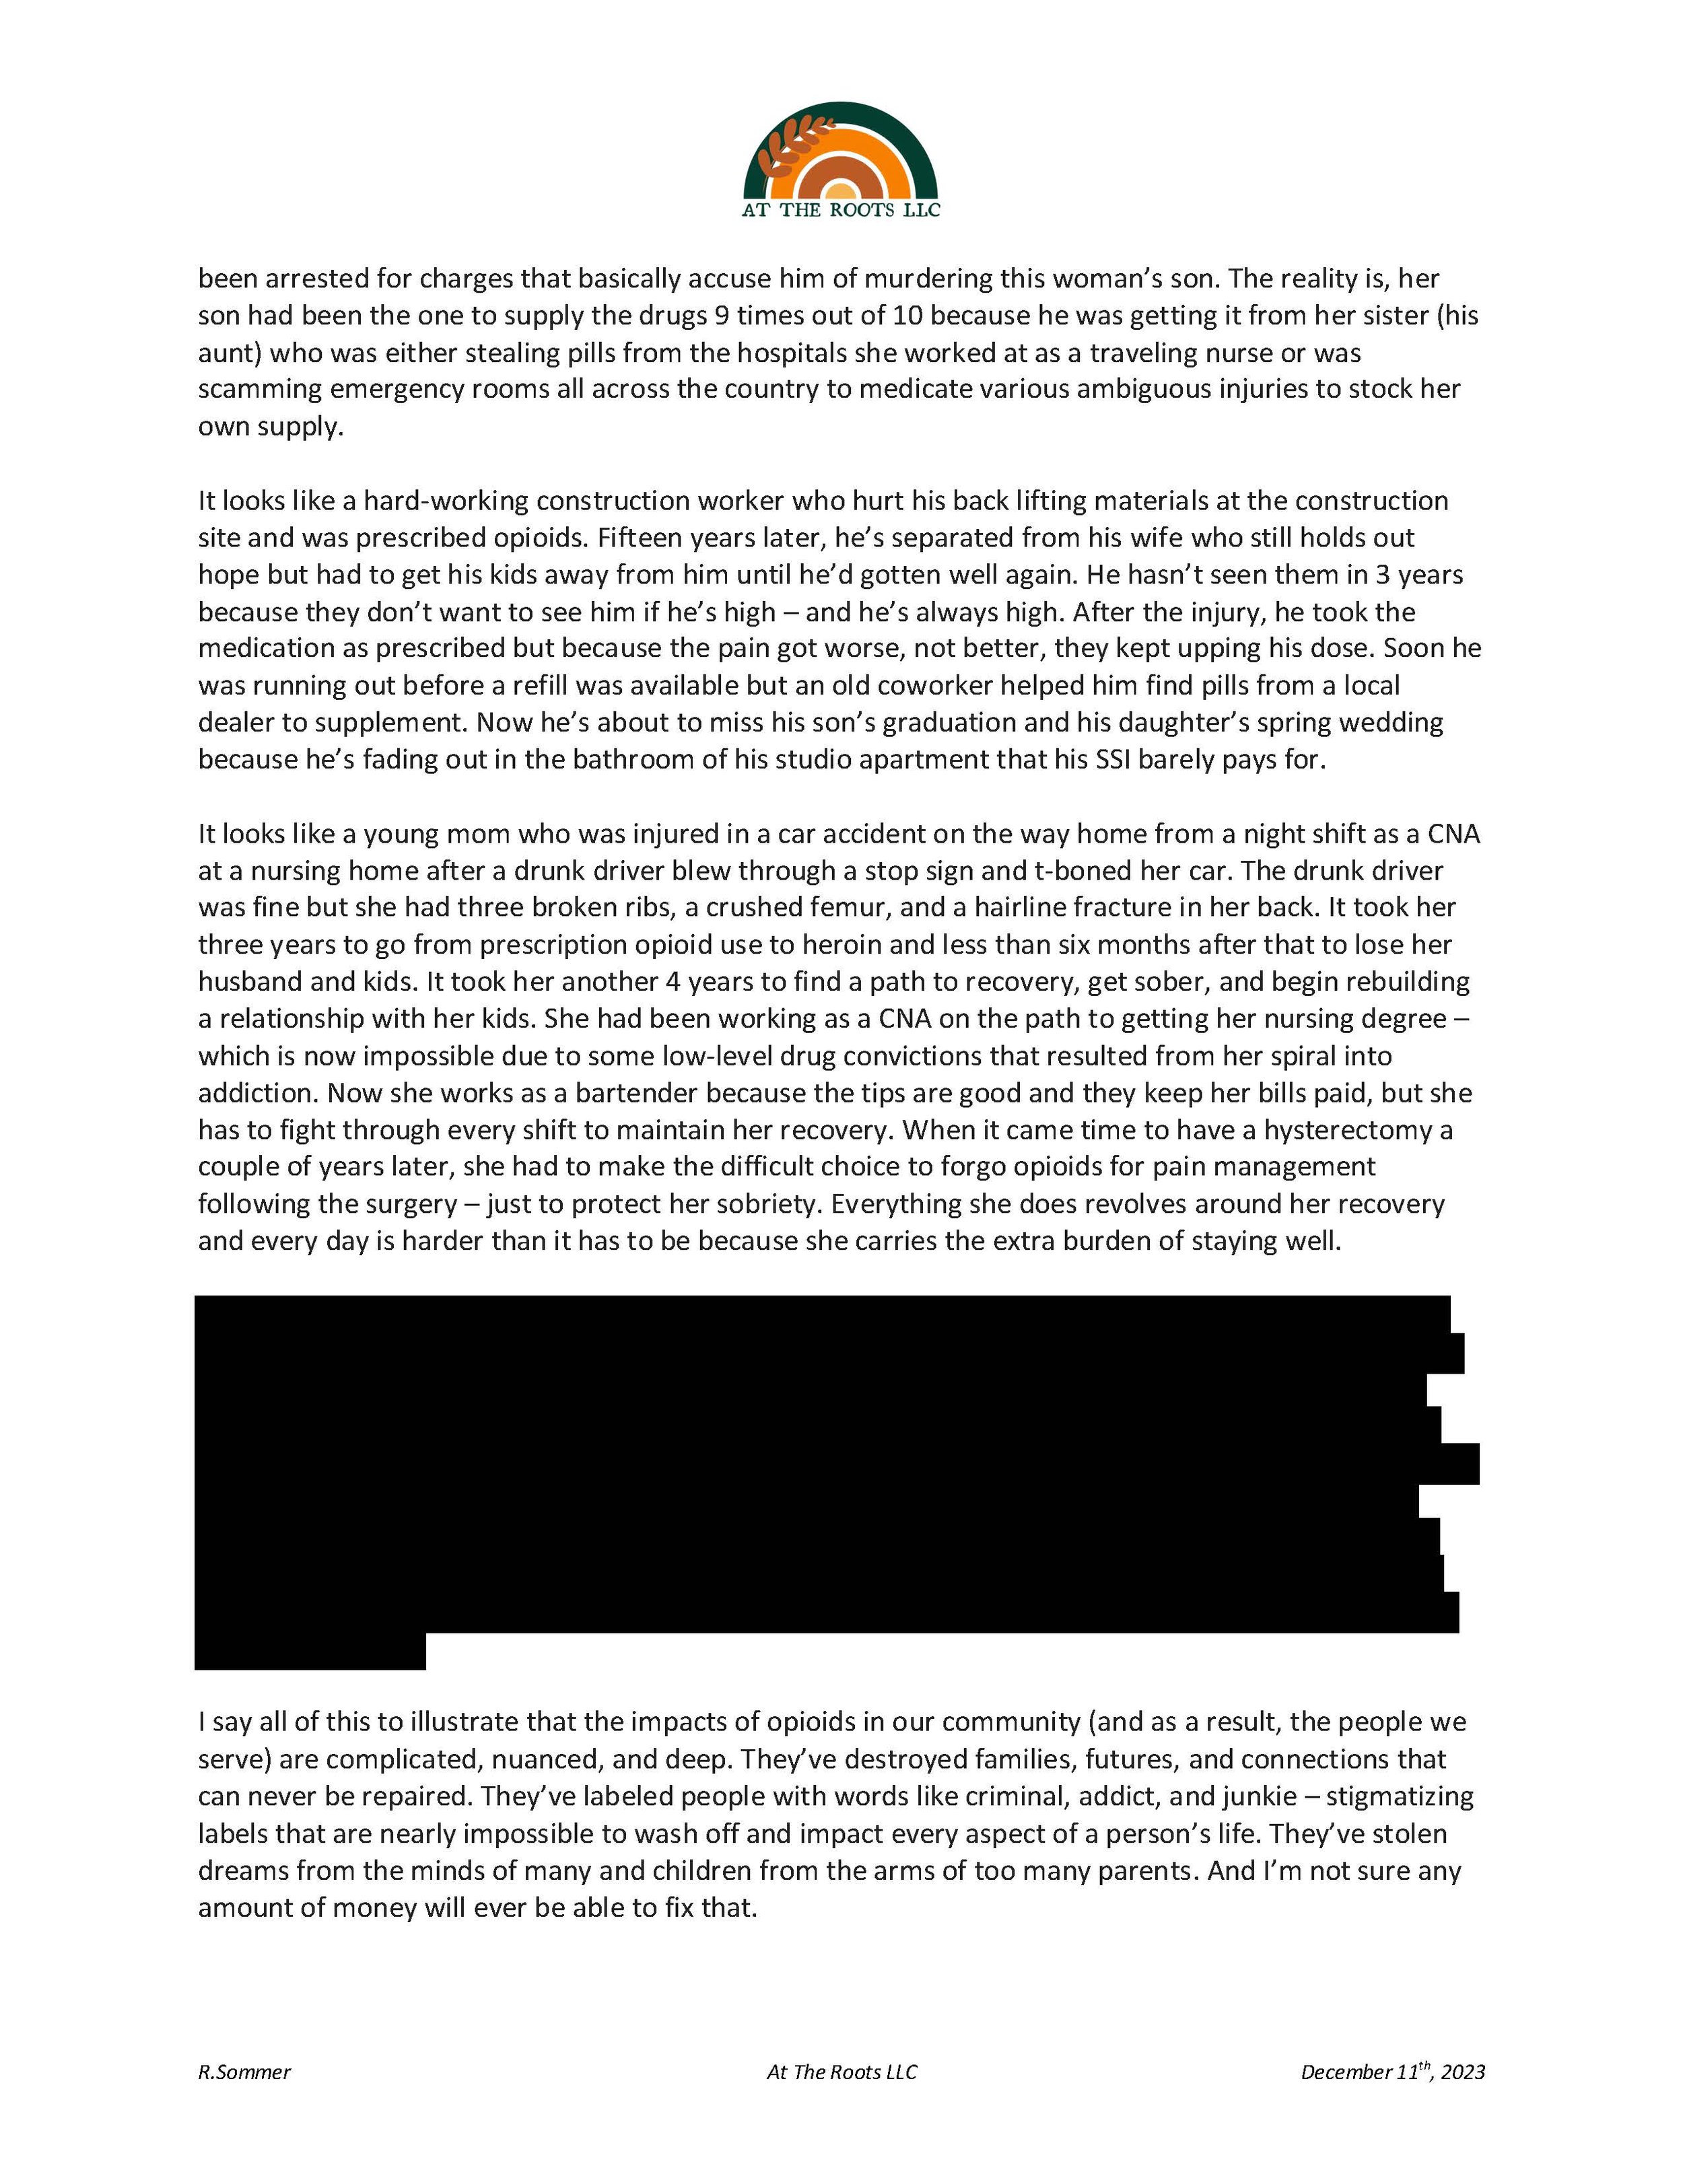 Dose of Reality Roundtable Response by Renee Sommer_Redacted_Page_2.jpg